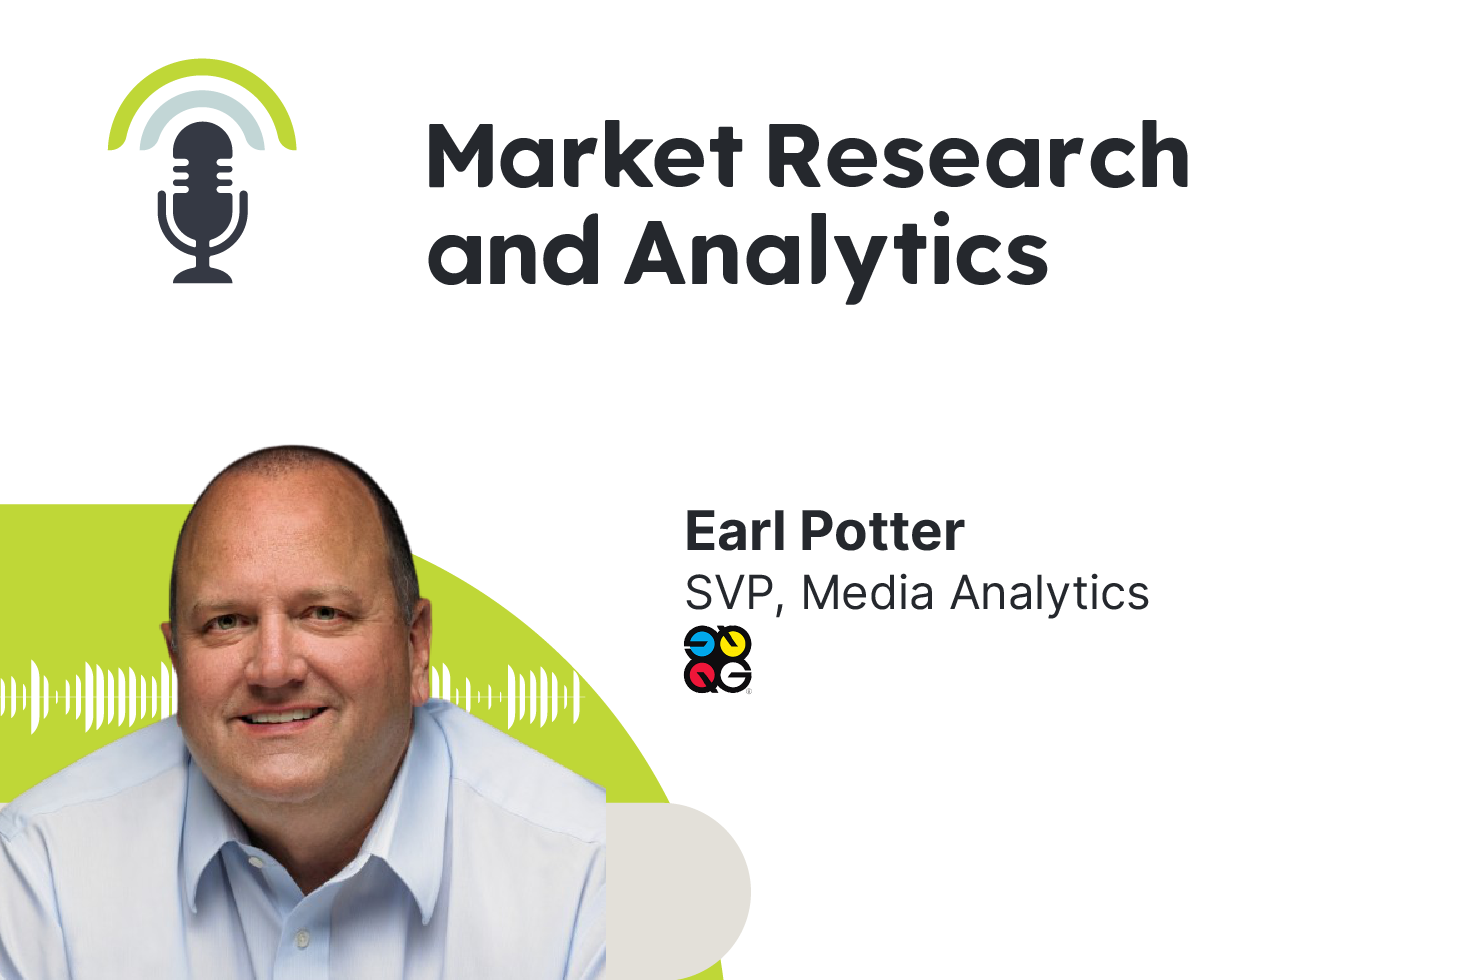 Measure Success: Market Research and Analytics Yield Results